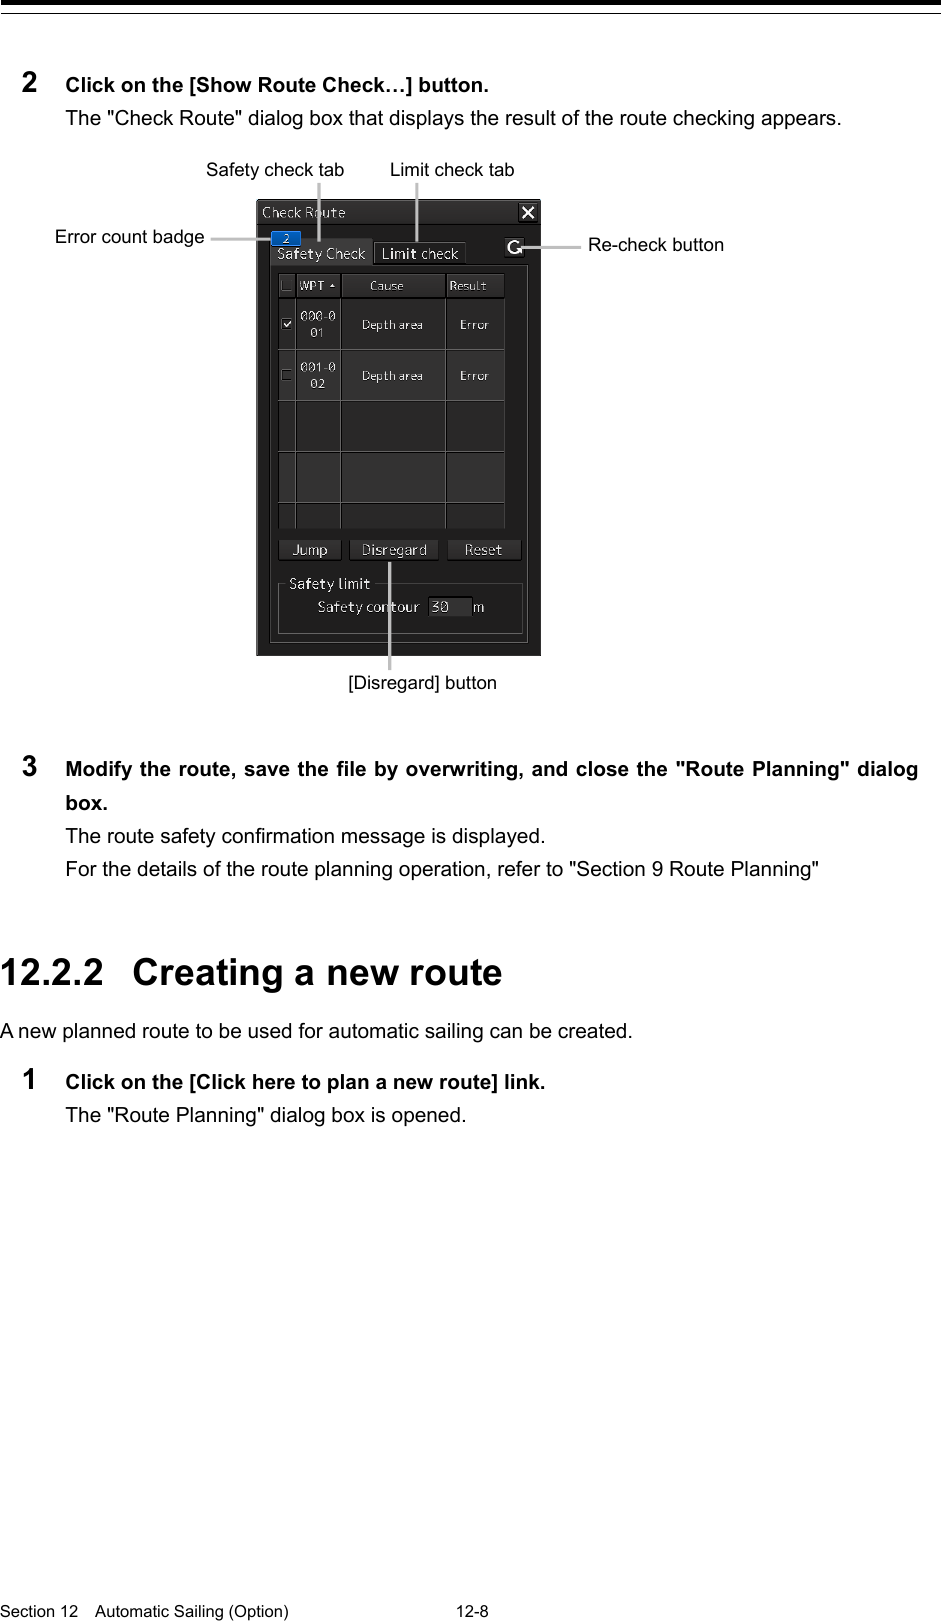  Section 12  Automatic Sailing (Option)  12-8  2  Click on the [Show Route Check…] button. The &quot;Check Route&quot; dialog box that displays the result of the route checking appears.    3  Modify the route, save the file by overwriting, and close the &quot;Route Planning&quot; dialog box. The route safety confirmation message is displayed. For the details of the route planning operation, refer to &quot;Section 9 Route Planning&quot;   12.2.2 Creating a new route A new planned route to be used for automatic sailing can be created. 1  Click on the [Click here to plan a new route] link. The &quot;Route Planning&quot; dialog box is opened.   Re-check button Limit check tab Safety check tab Error count badge [Disregard] button 